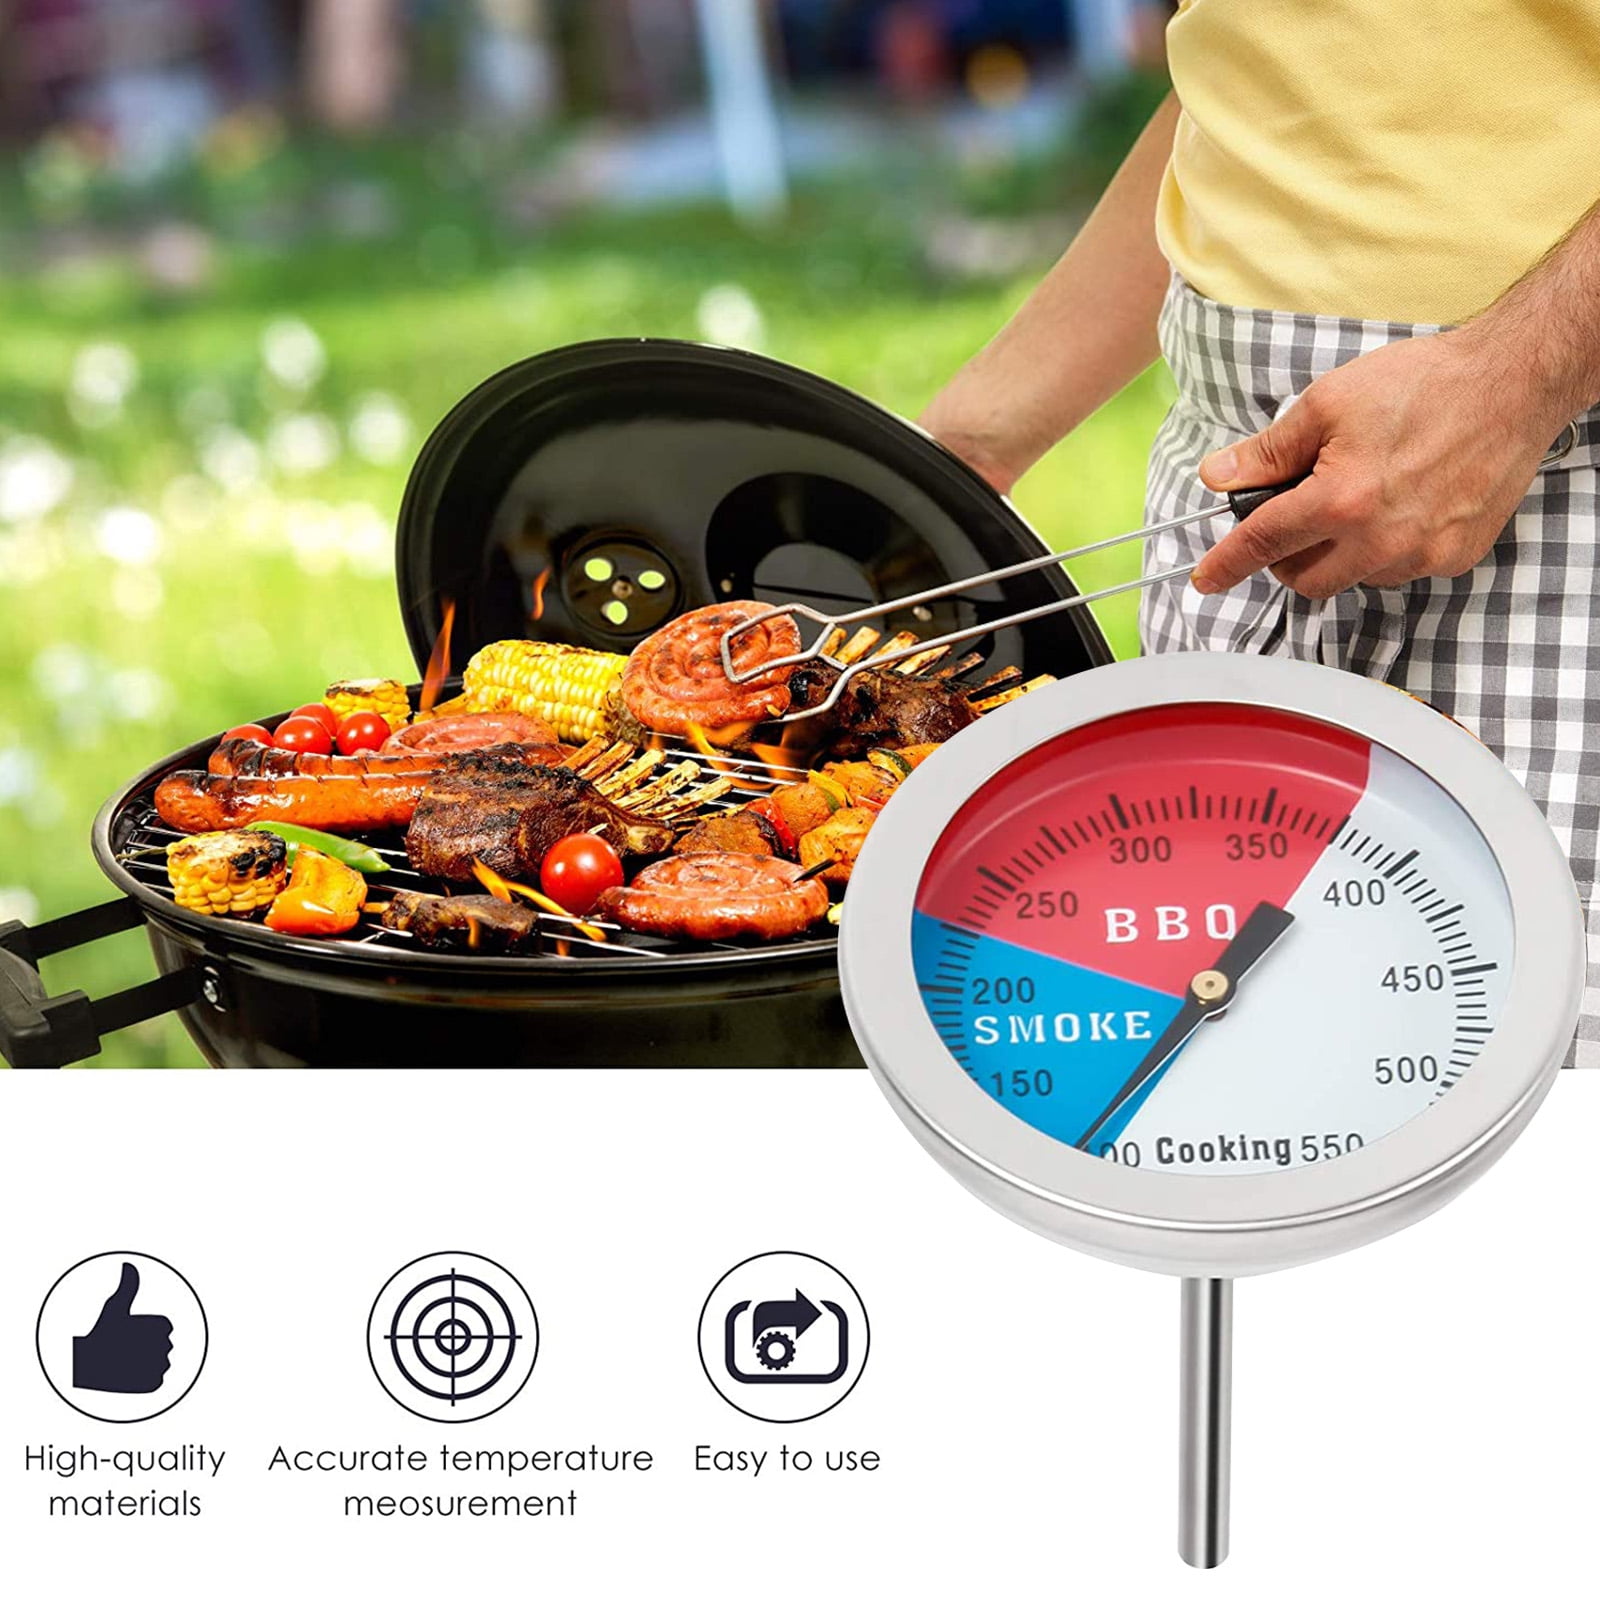 Smoker BBQ Thermometer Temperature Gauge Pit Grill Thermometer for Meat Cooking 